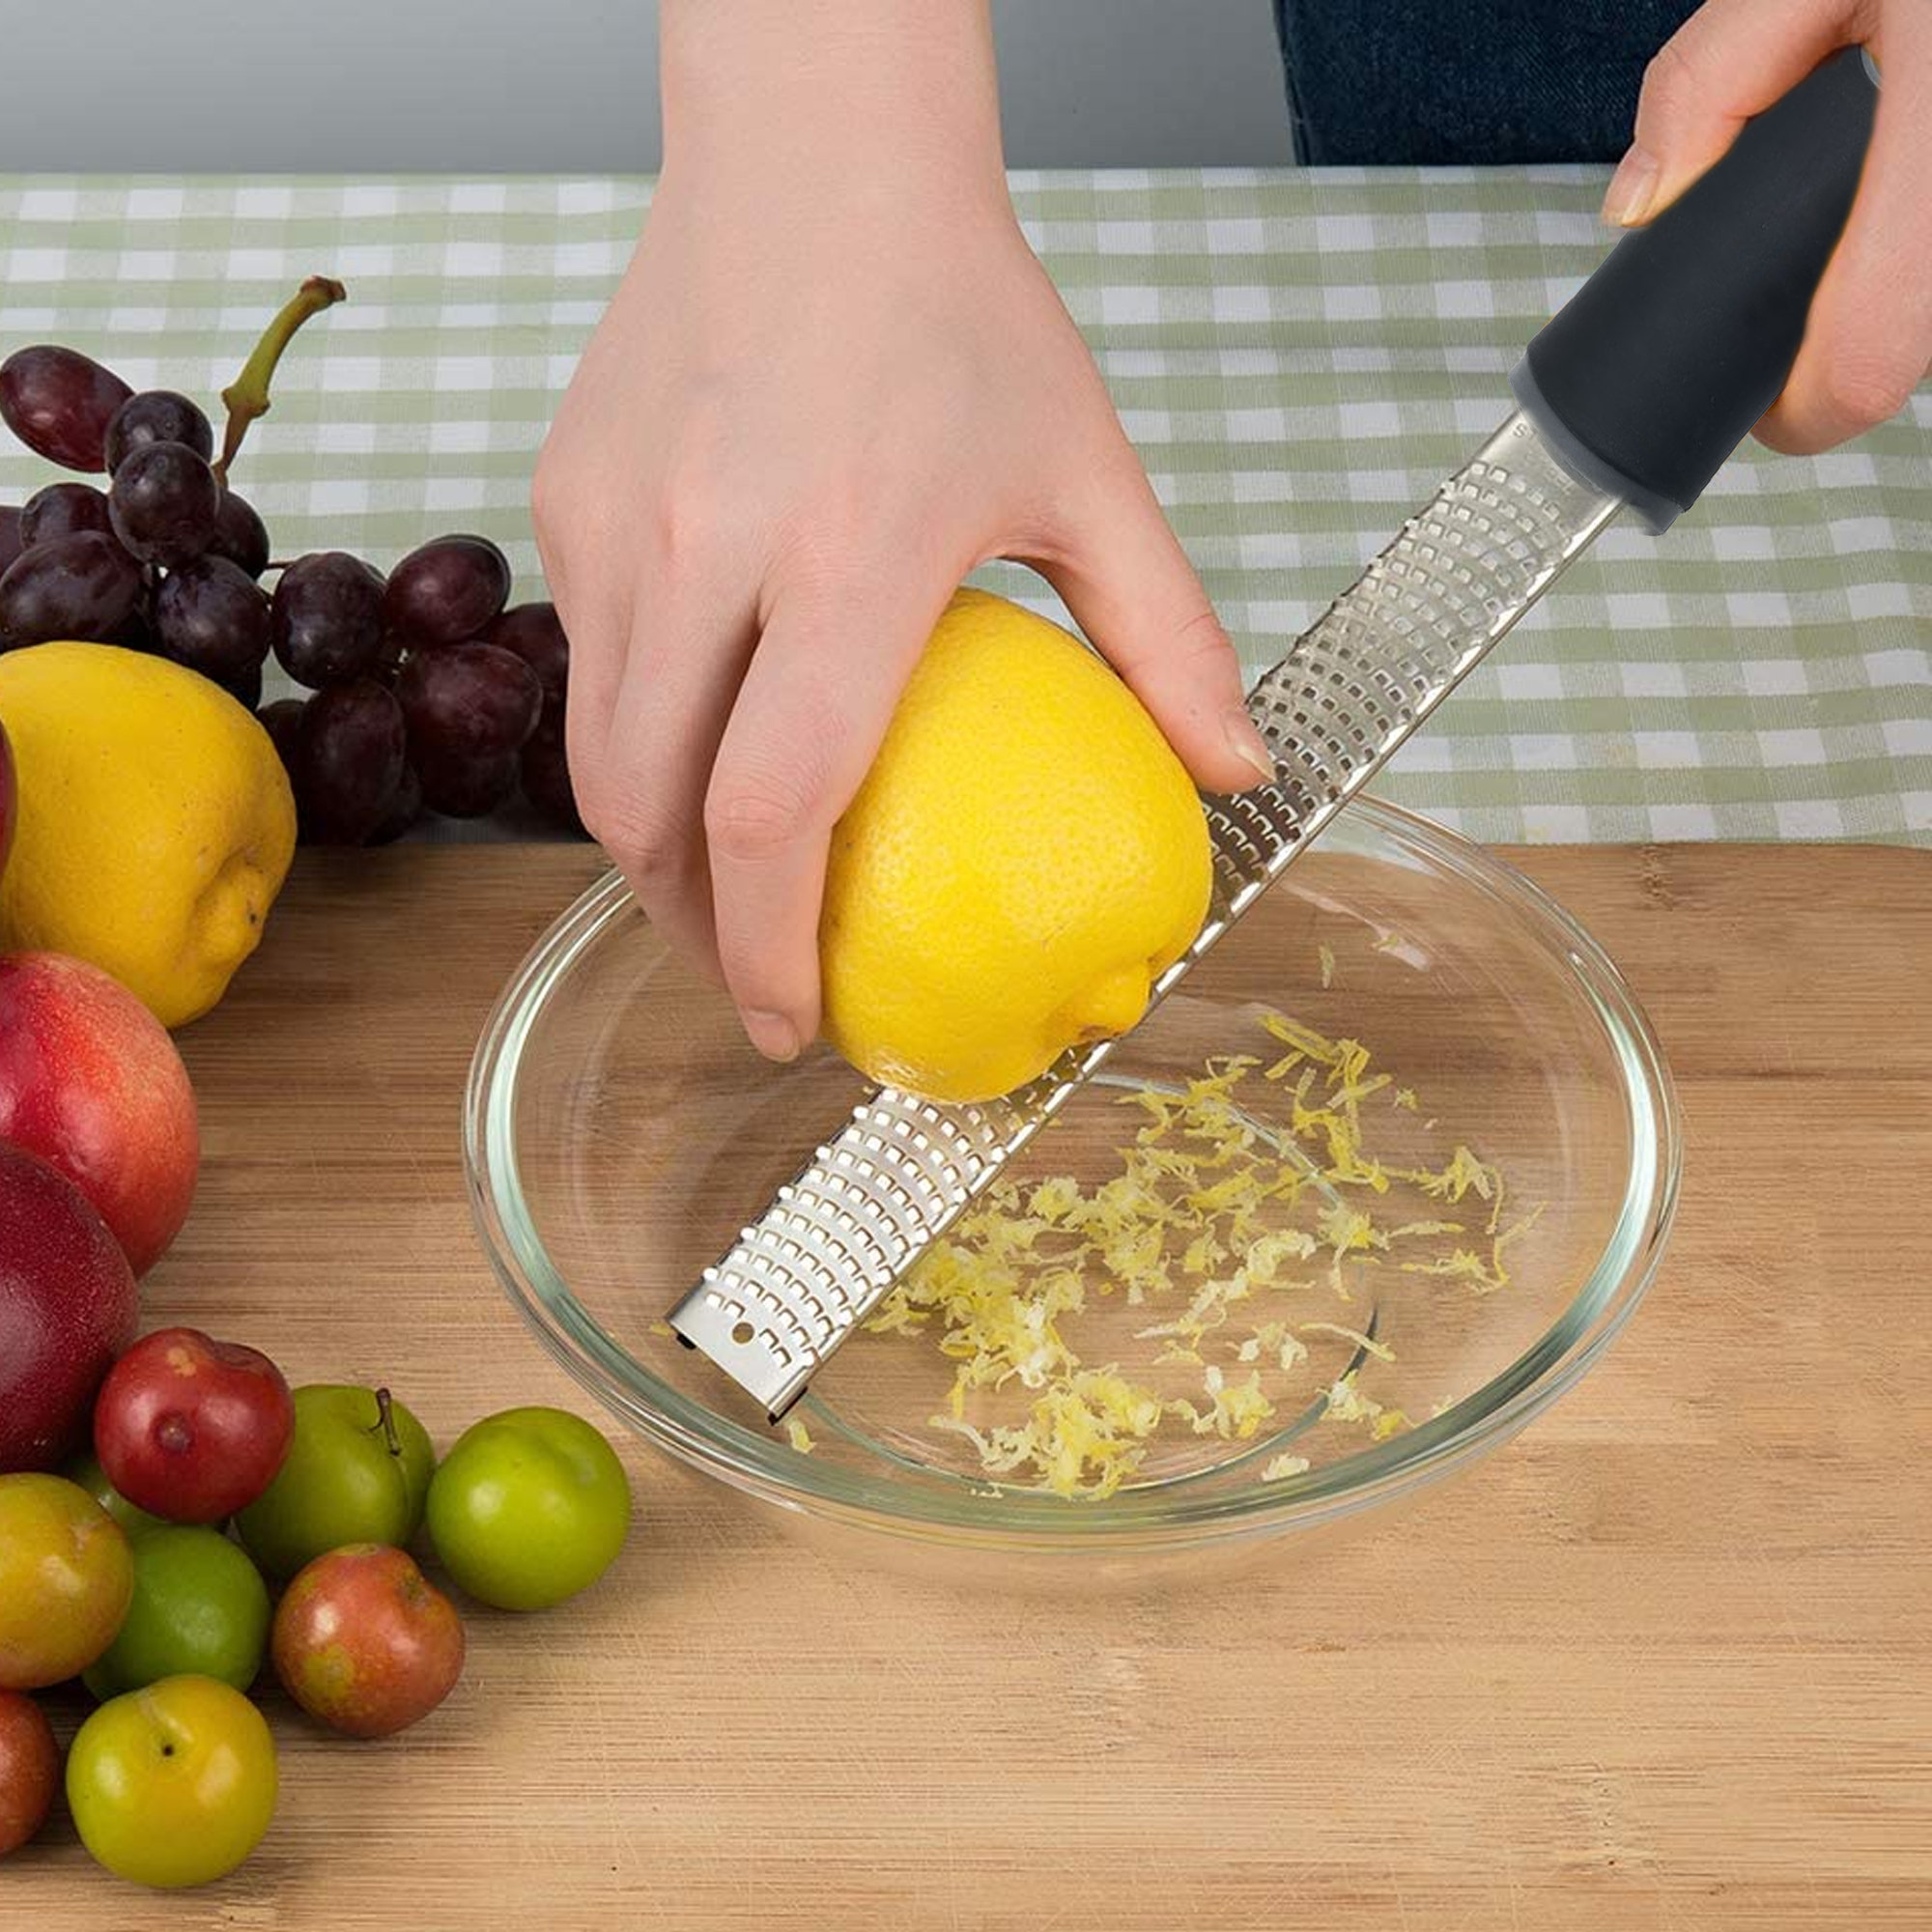 Cheese Grater & Shredder - Stainless Steel with Ergonomic Silicone